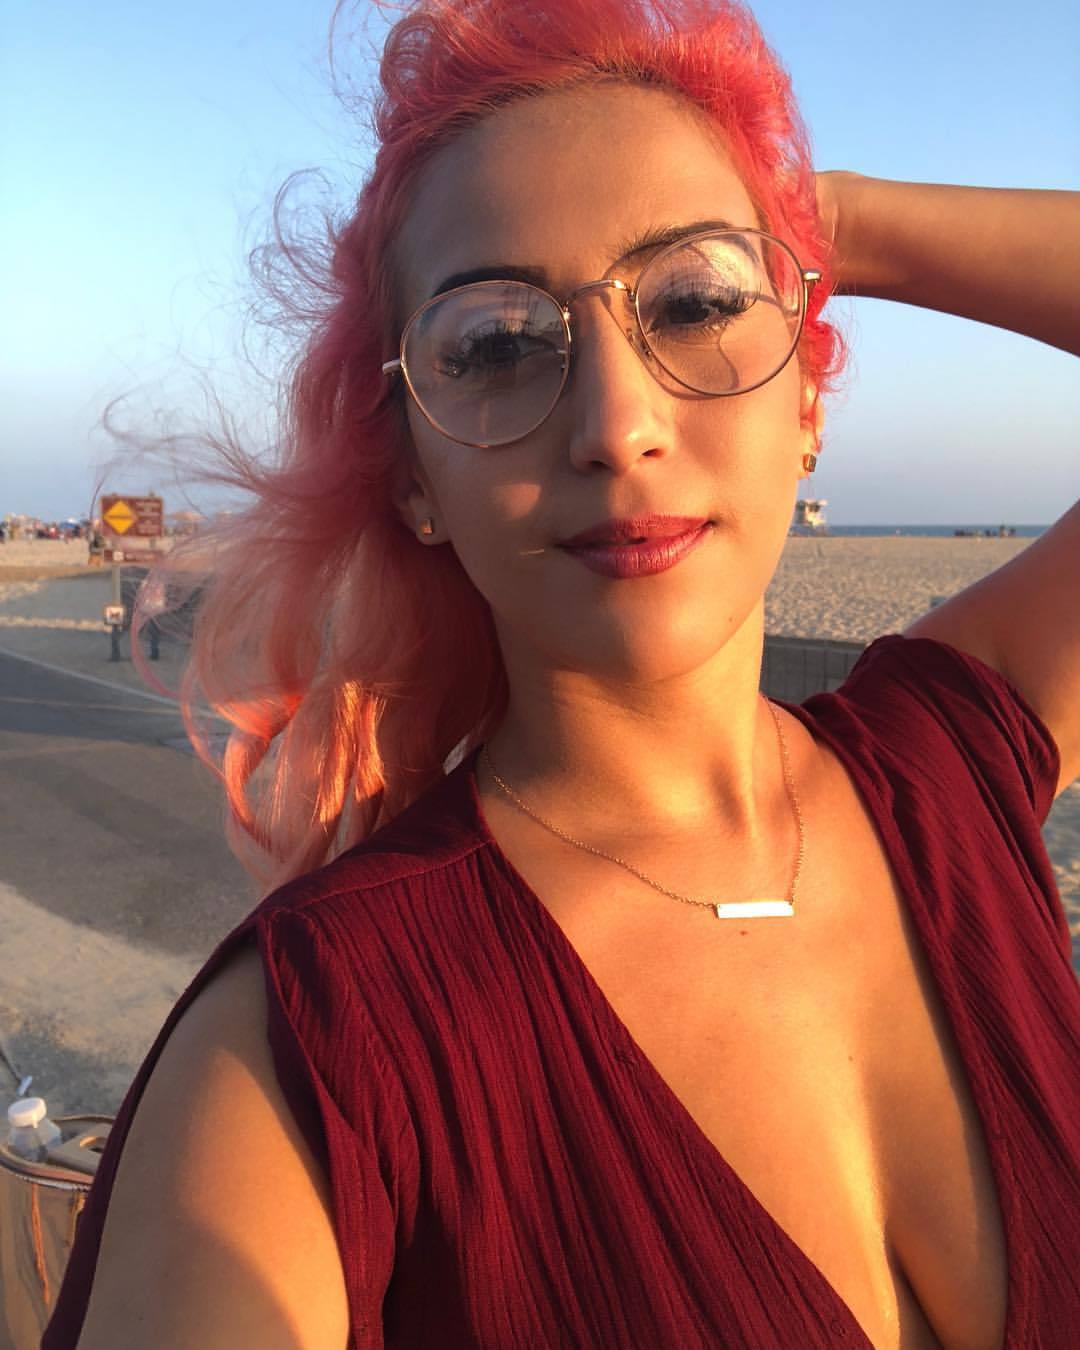 Dyed my hair pink and went to a wedding on the beach 💕 (at Huntington Beach, California)